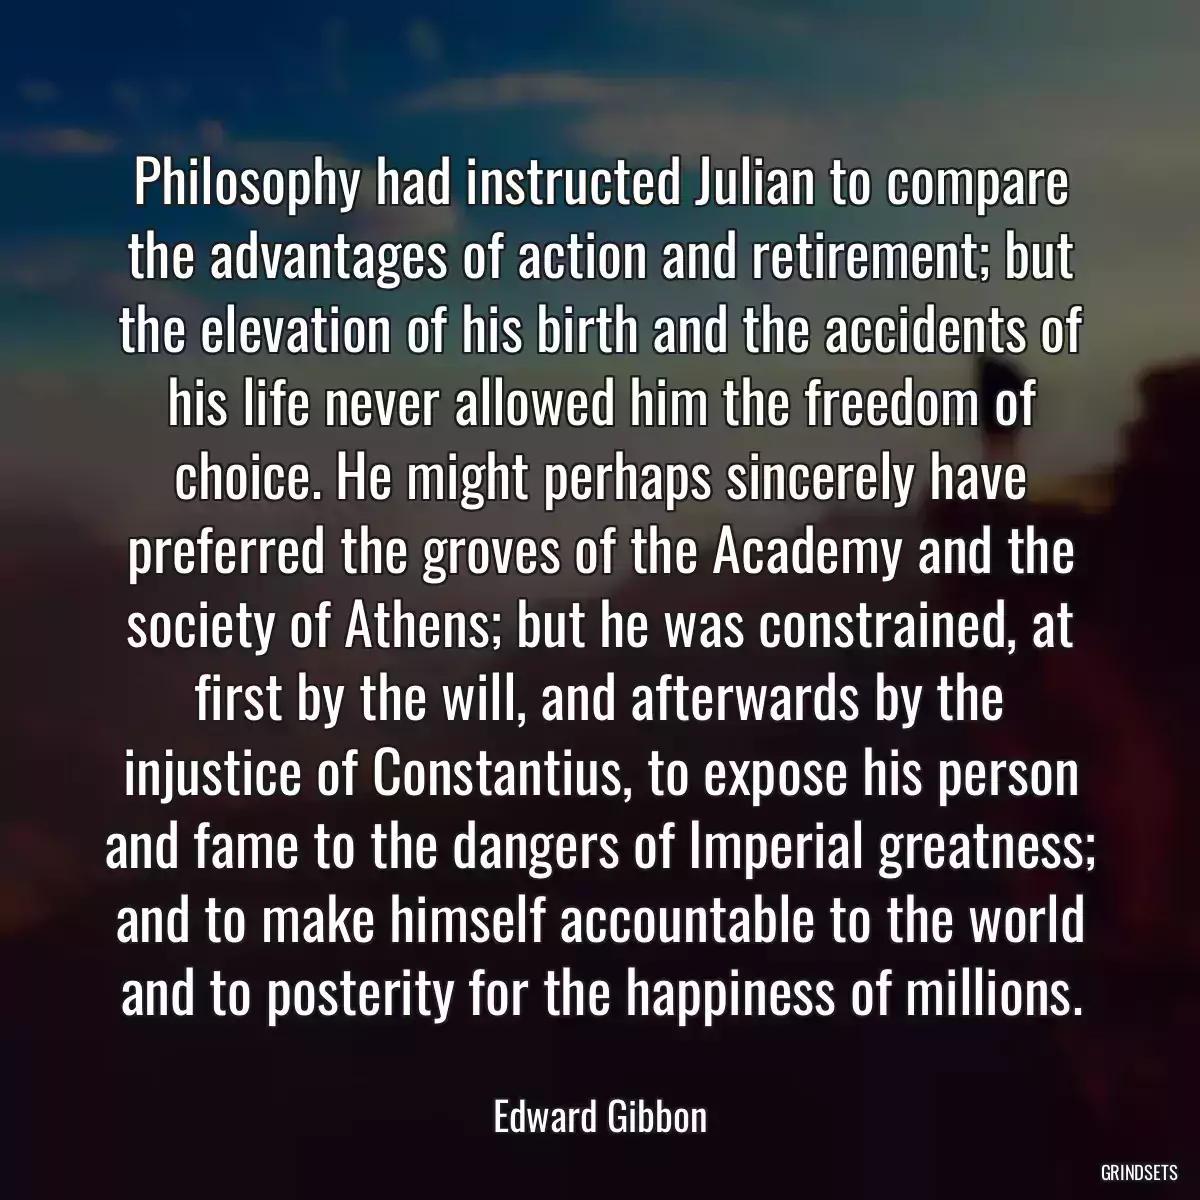 Philosophy had instructed Julian to compare the advantages of action and retirement; but the elevation of his birth and the accidents of his life never allowed him the freedom of choice. He might perhaps sincerely have preferred the groves of the Academy and the society of Athens; but he was constrained, at first by the will, and afterwards by the injustice of Constantius, to expose his person and fame to the dangers of Imperial greatness; and to make himself accountable to the world and to posterity for the happiness of millions.